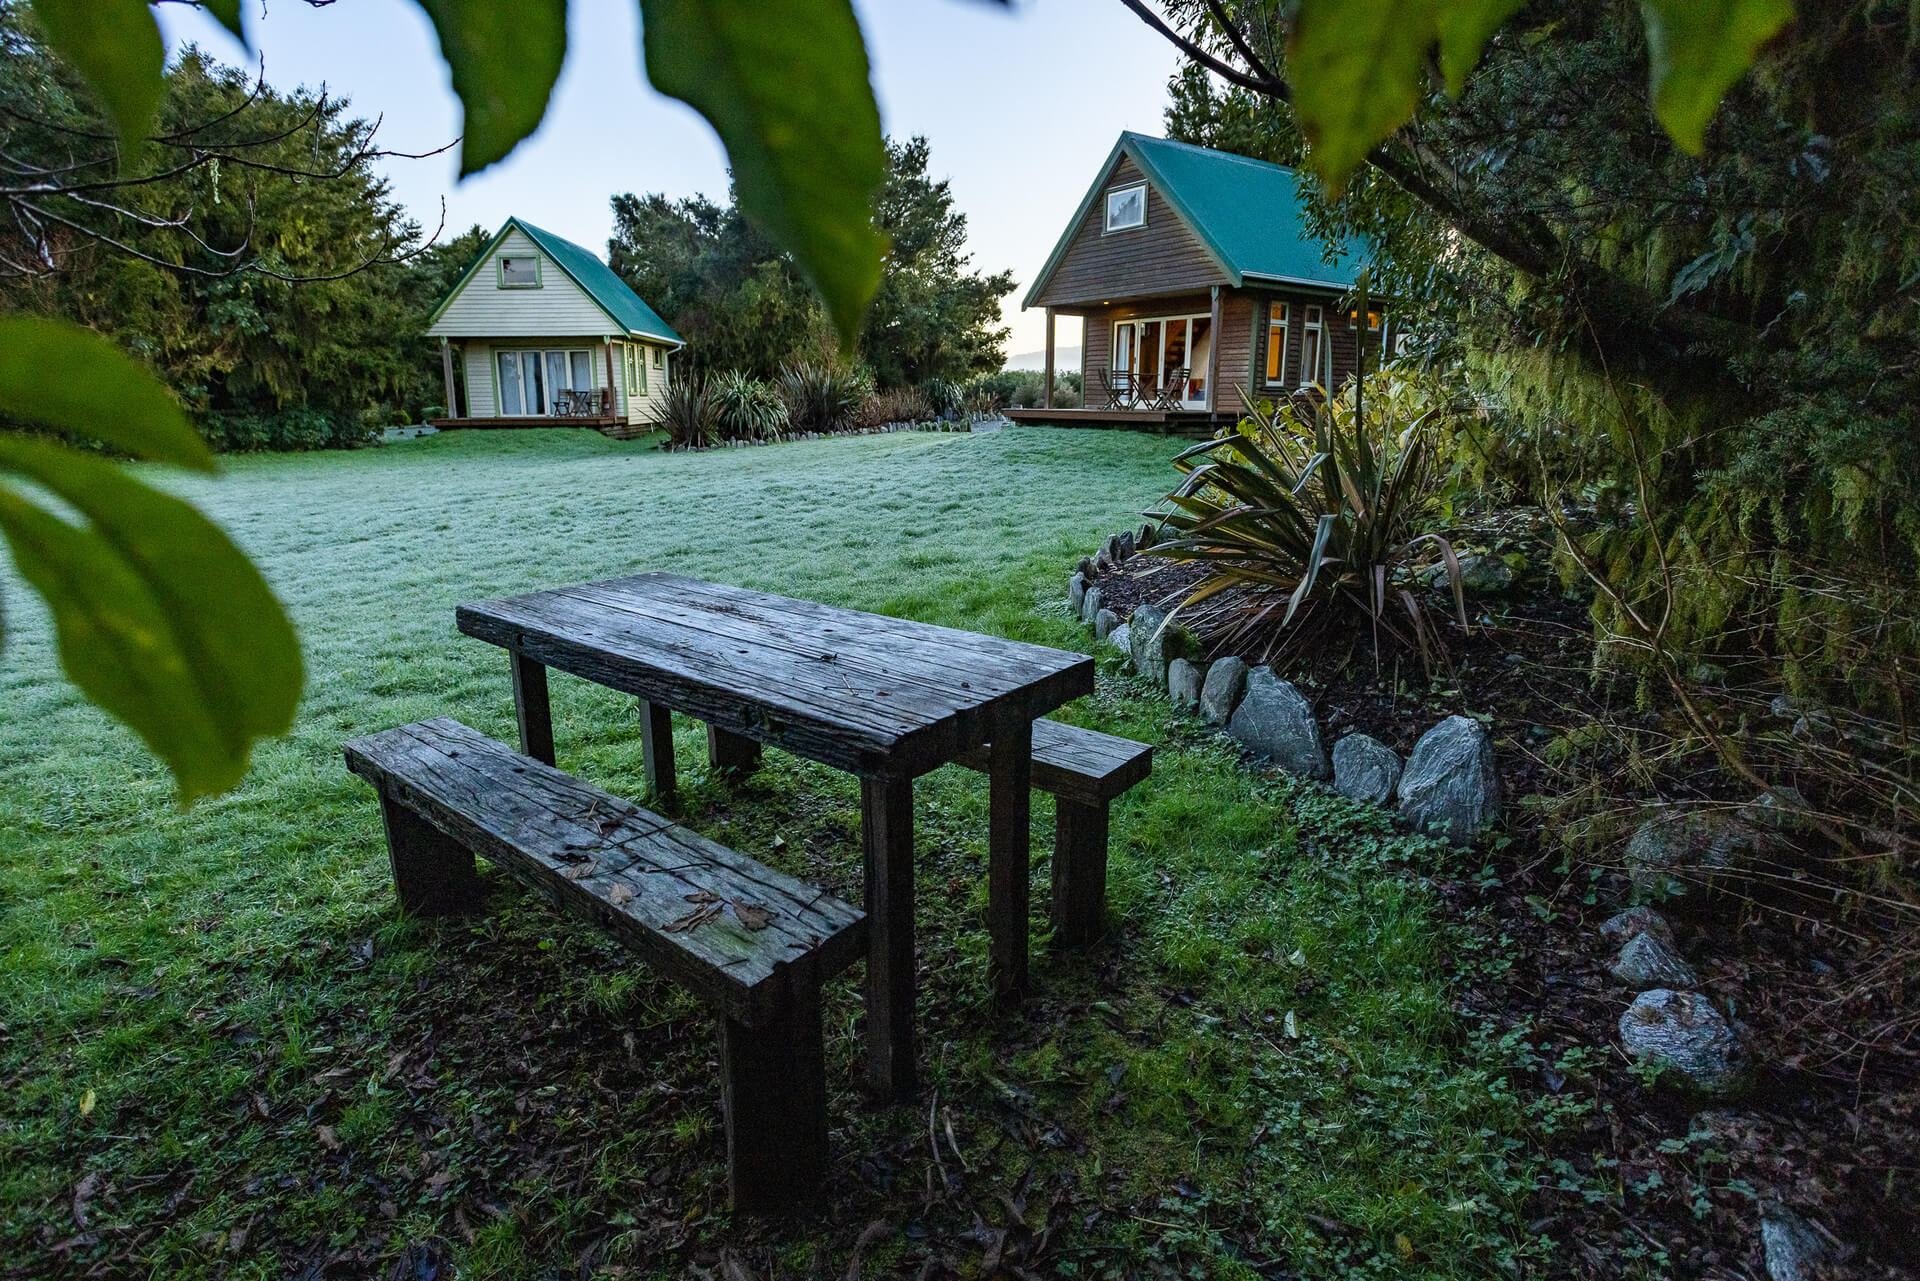 View of wooden table and chairs with frost, Chalets in background